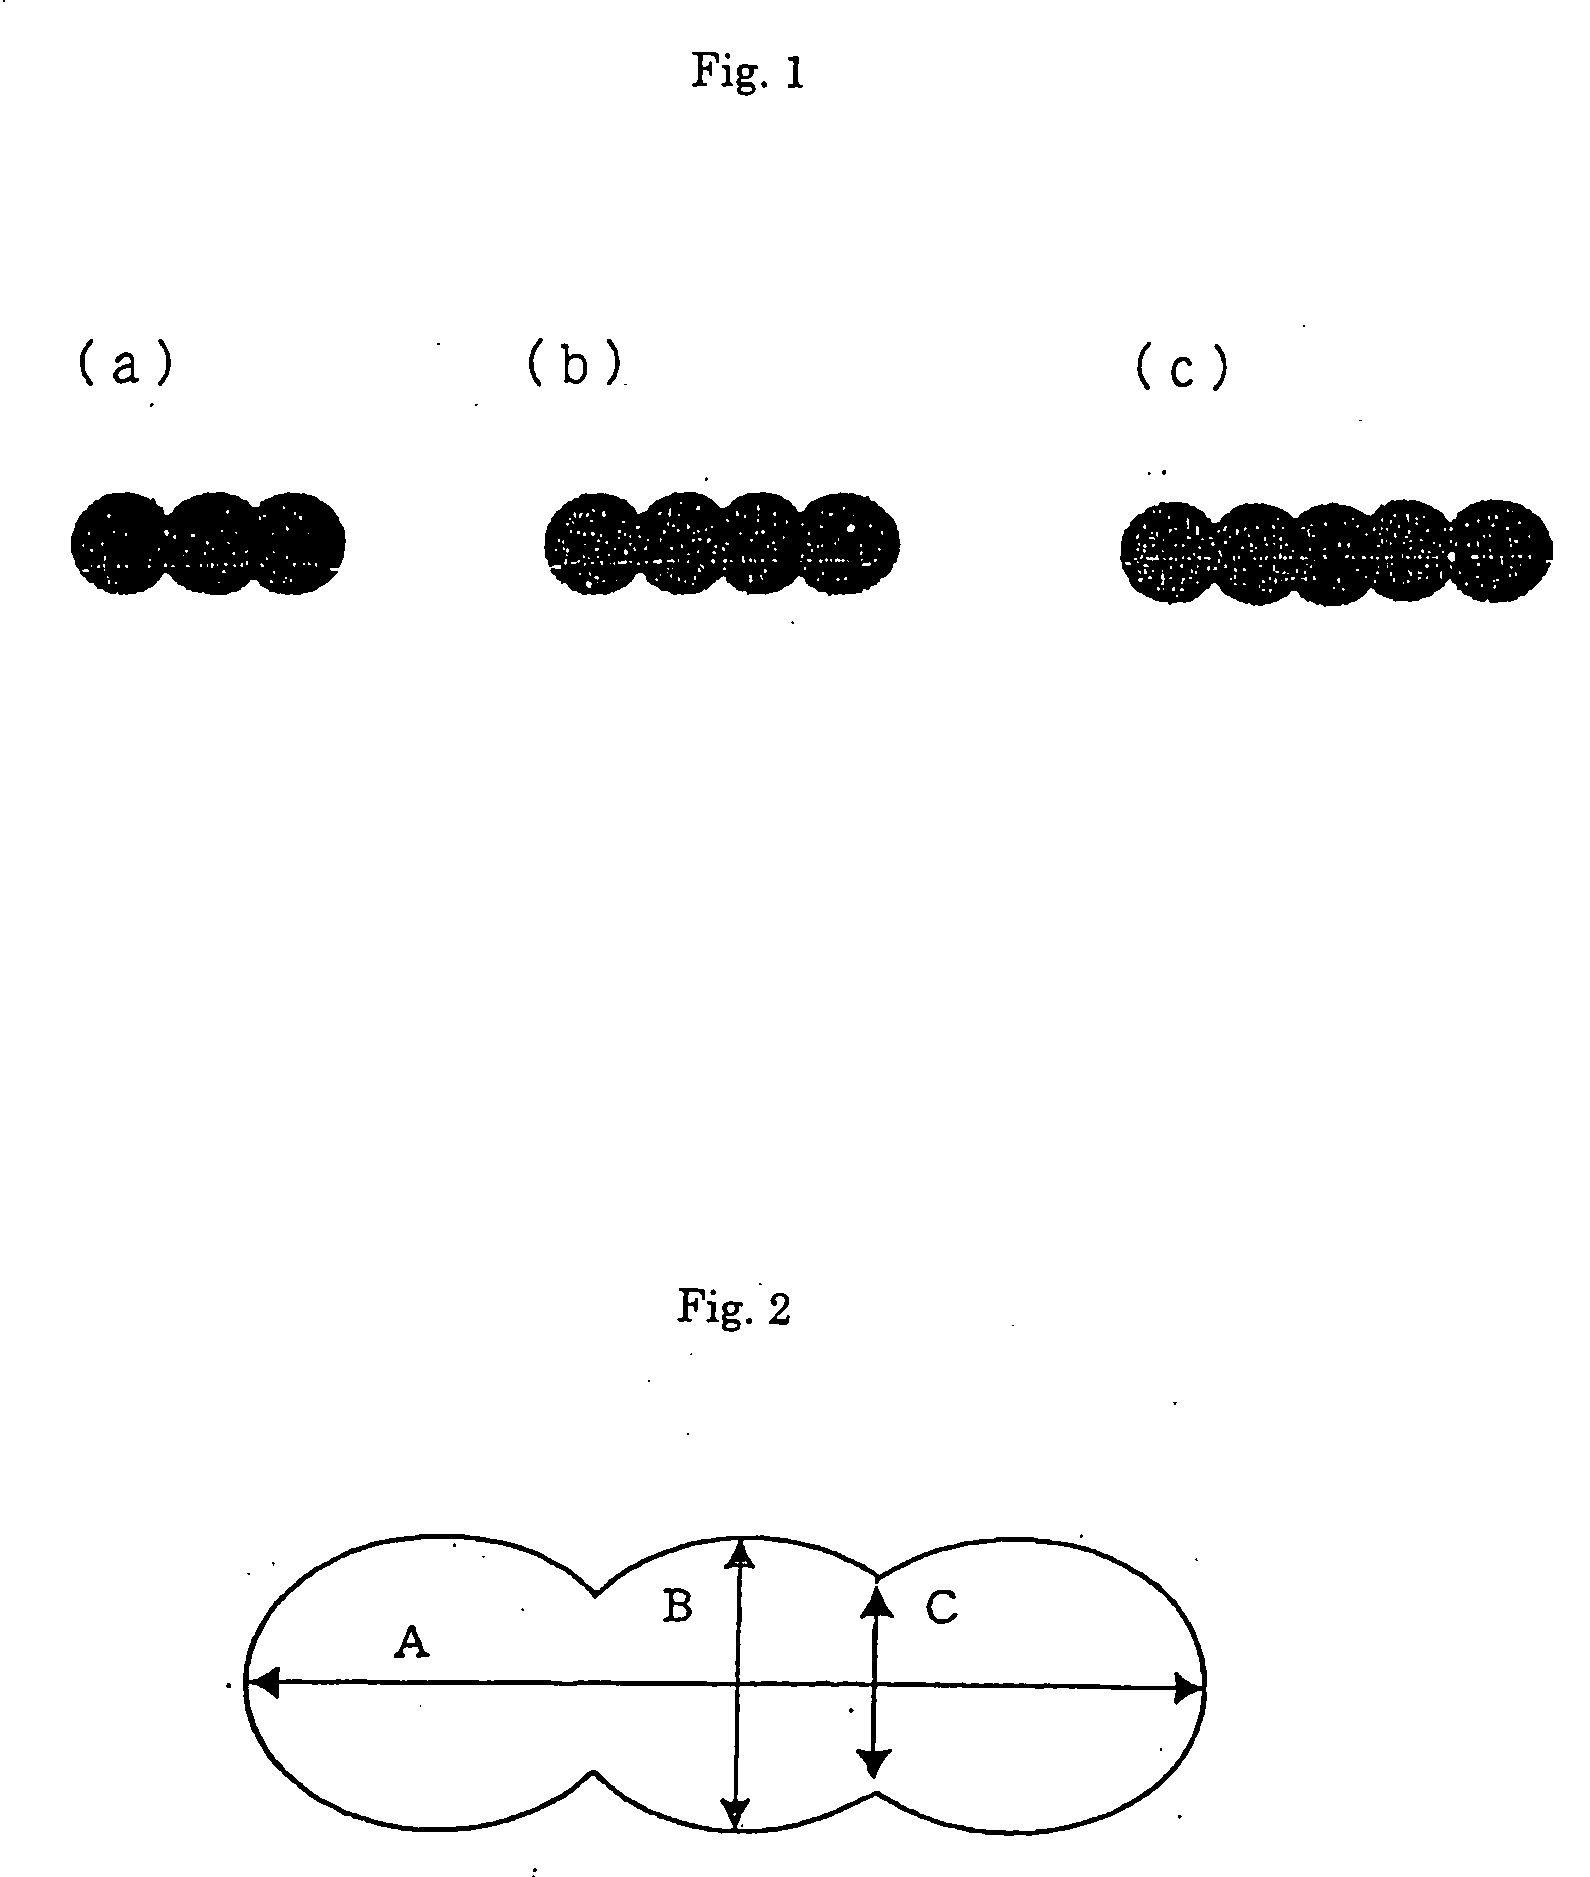 Modified cross-section polyester fibers